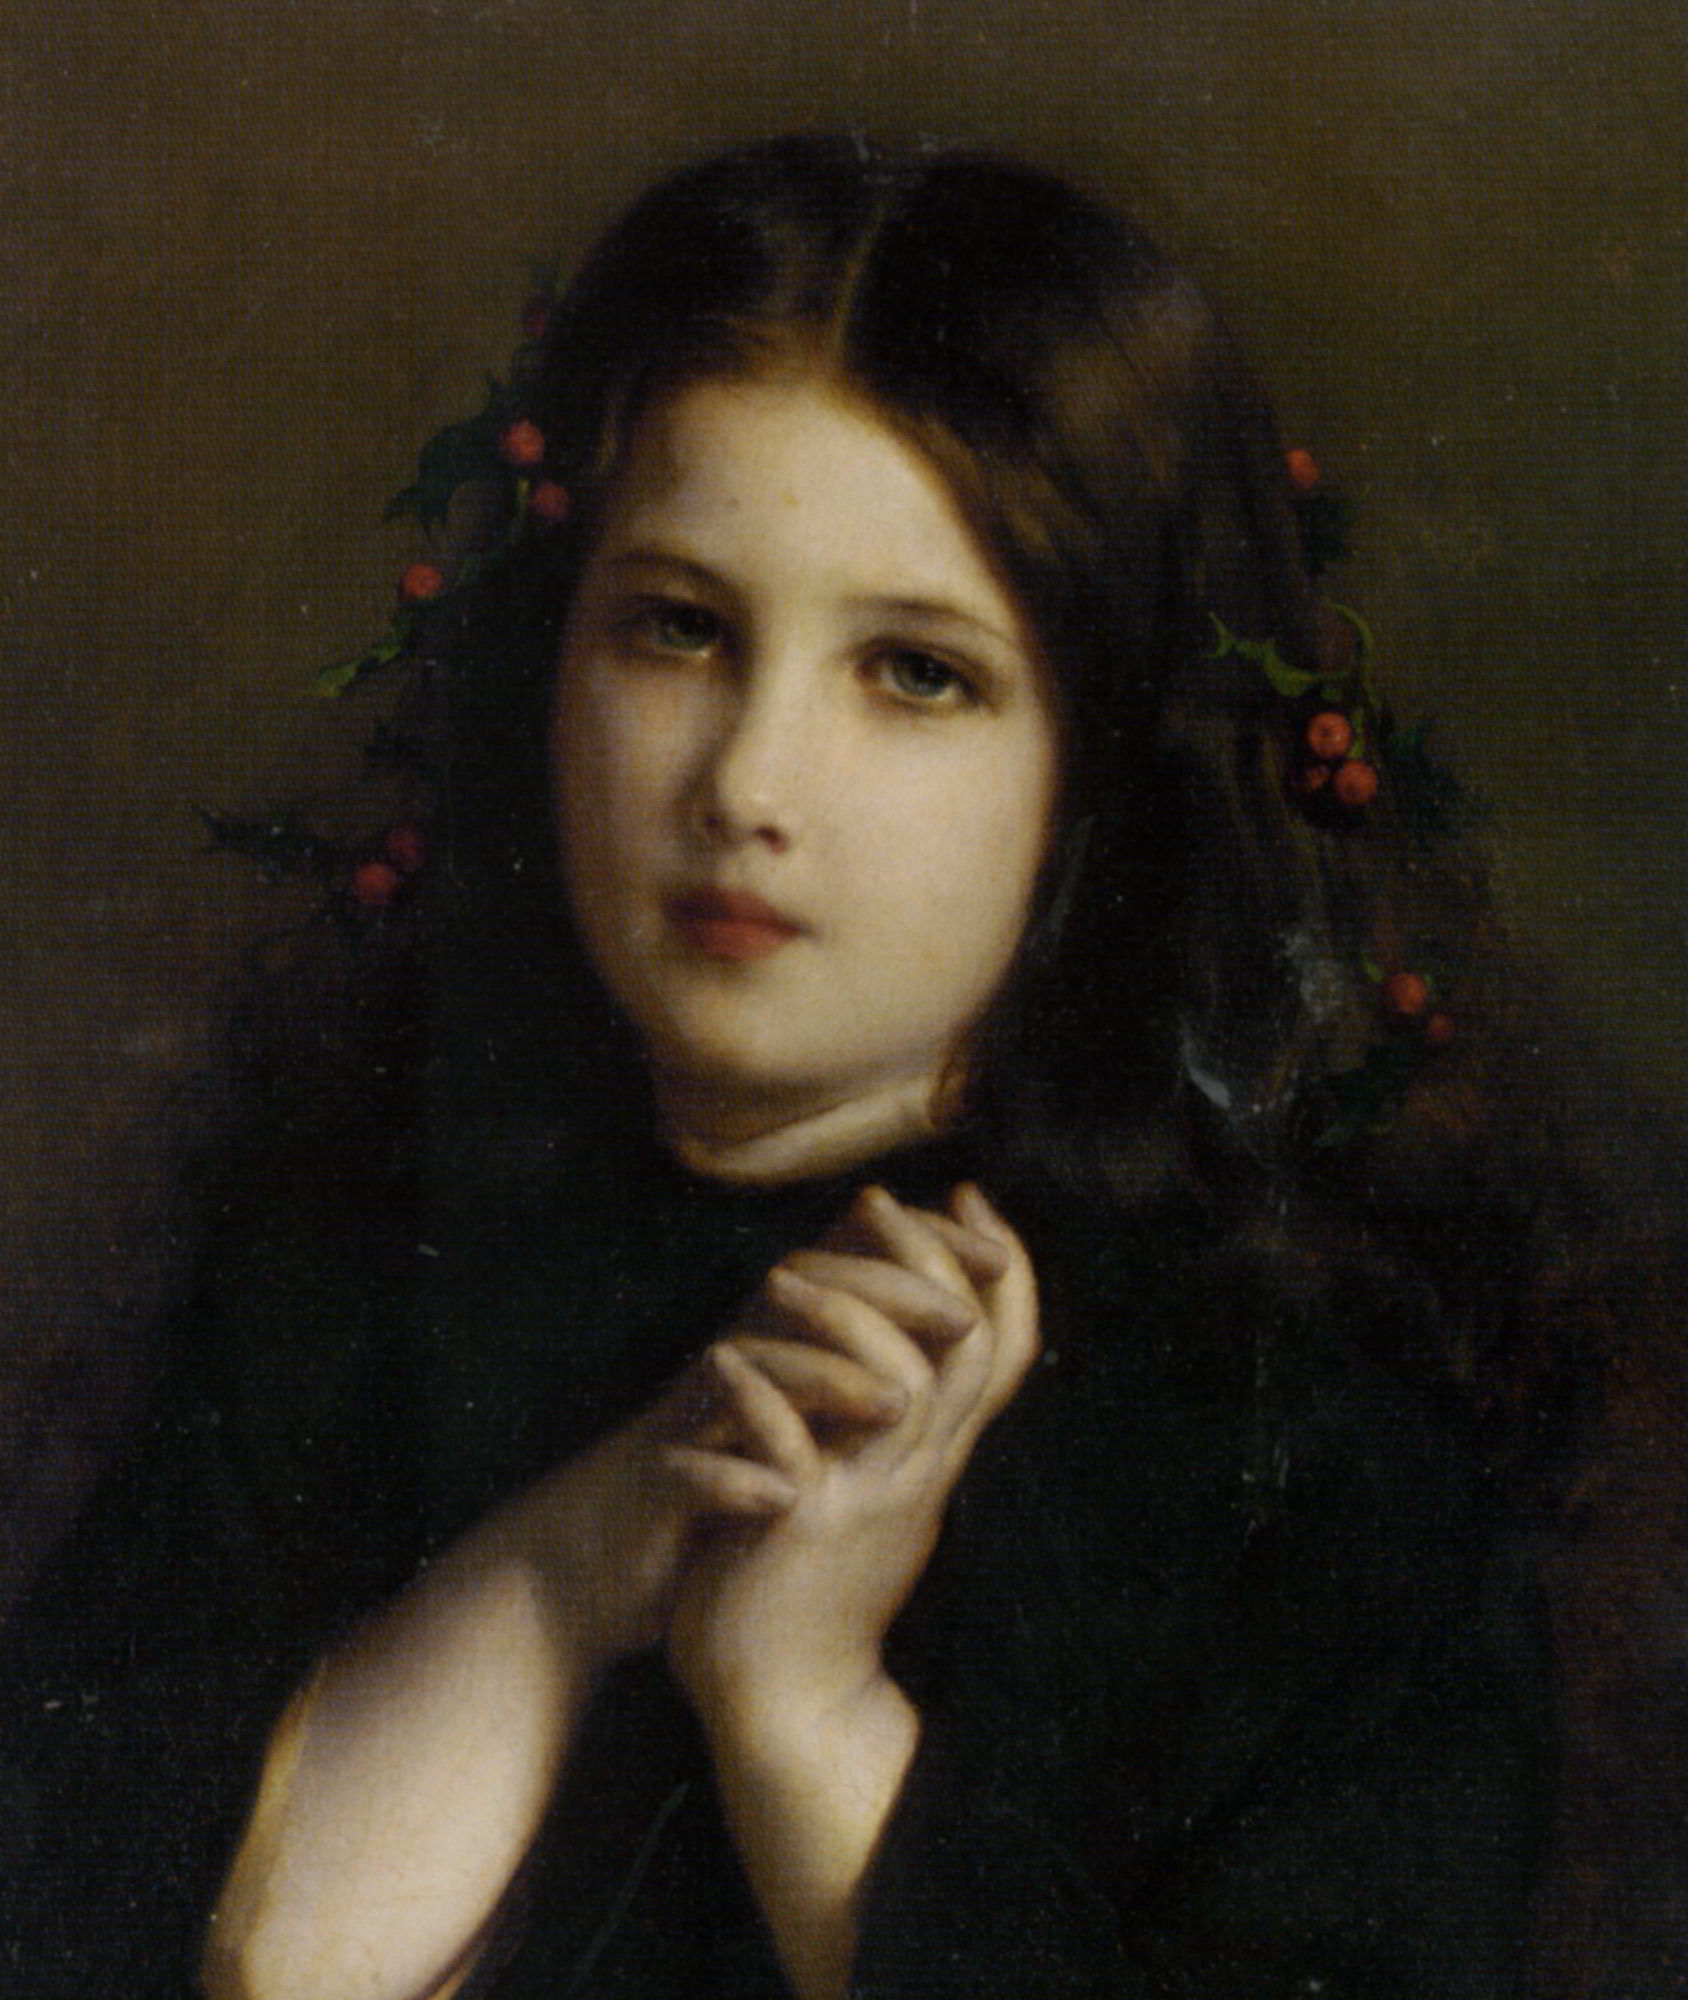 A Young Girl with Holly Berries by Etienne Adolphe Piot